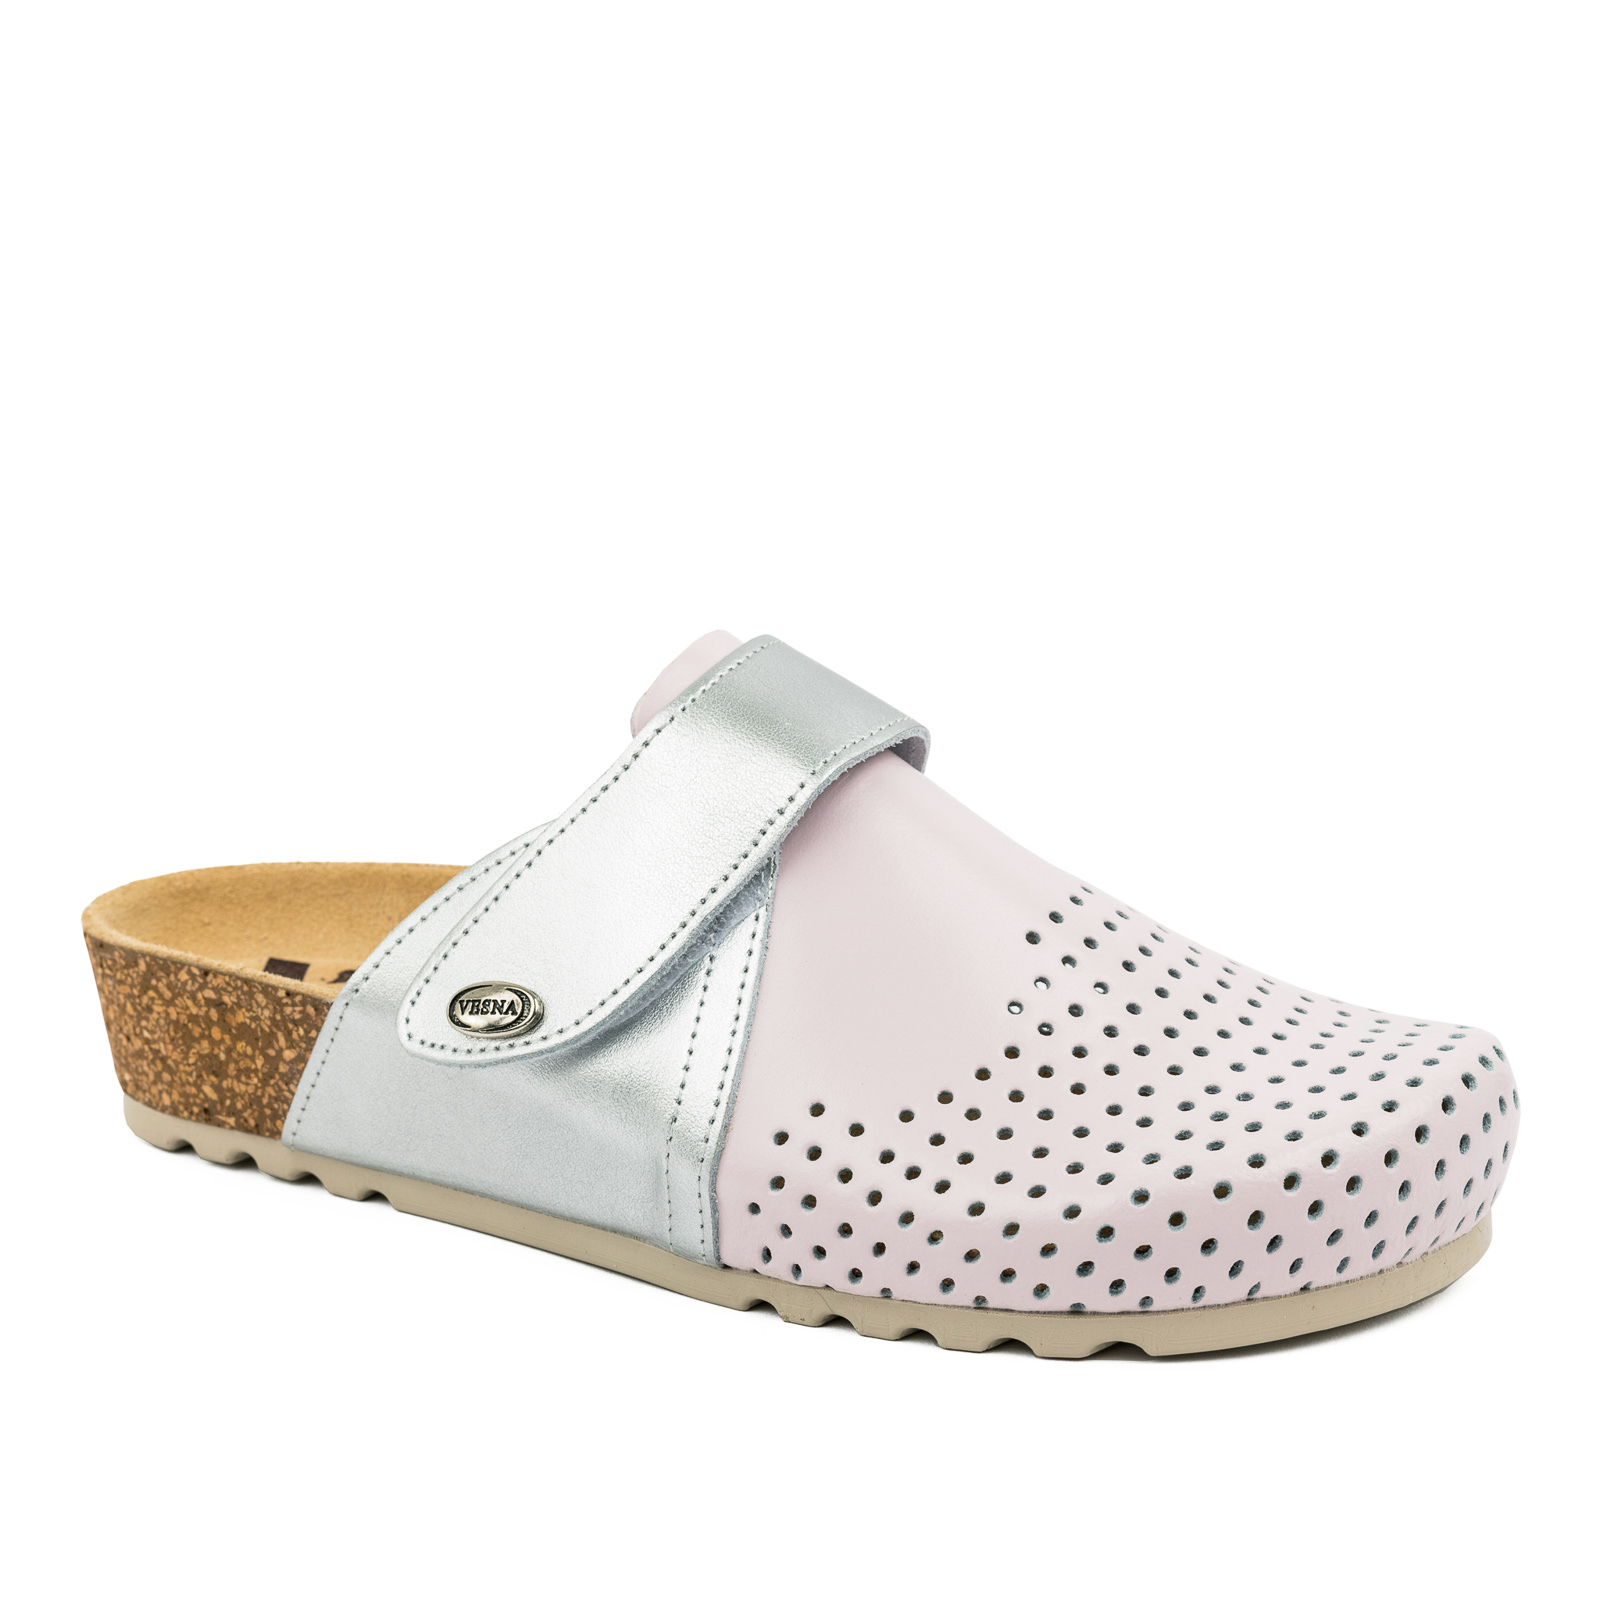 ANATOMIC LEATHER CLOGS WITH VELCRO BAND - SILVER/ROSE